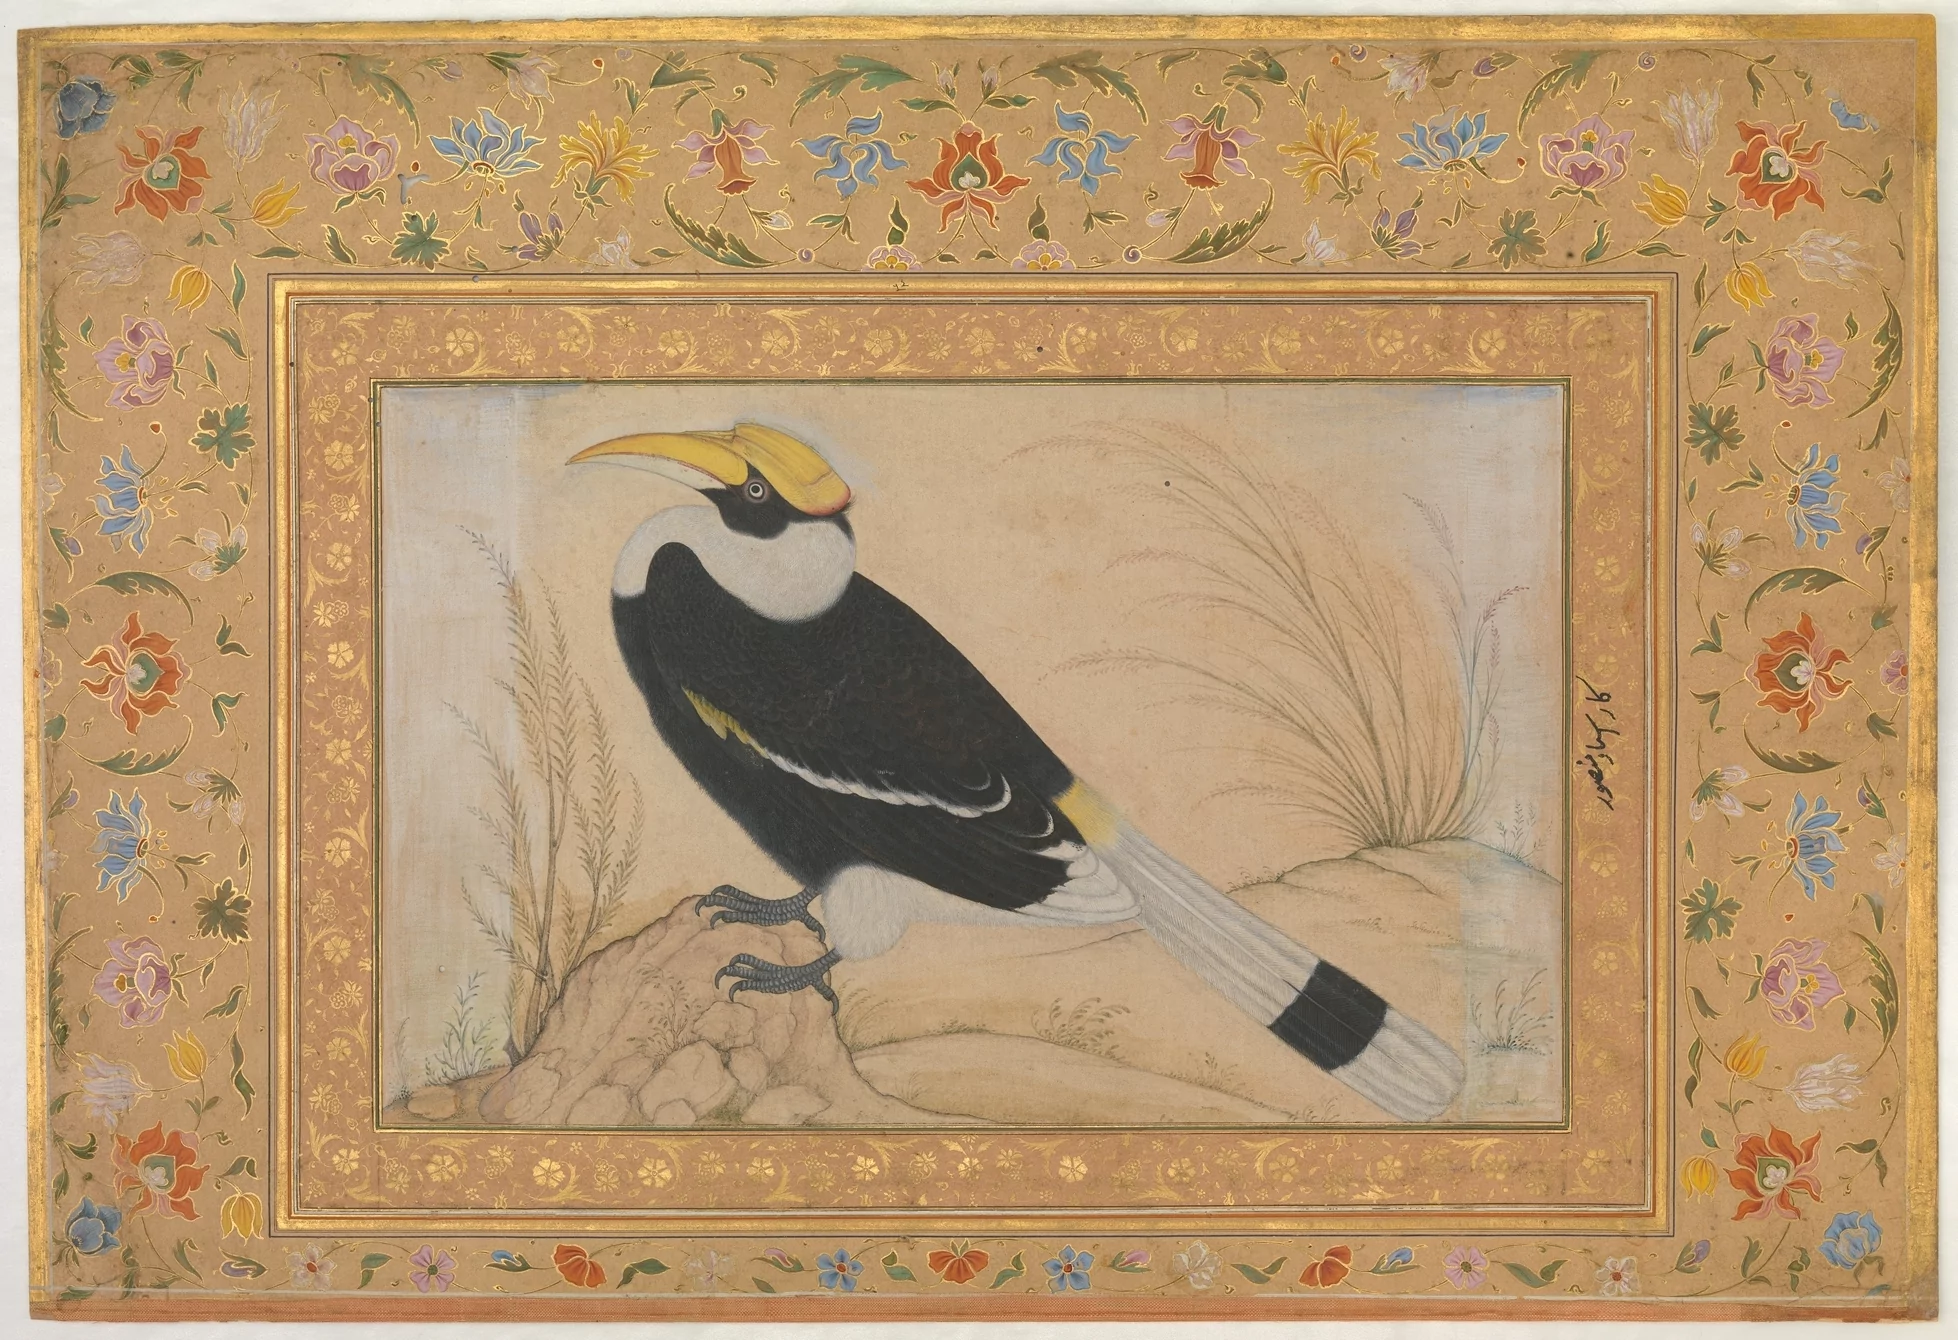 Naturalistic Influence on Mughal Miniature Painting